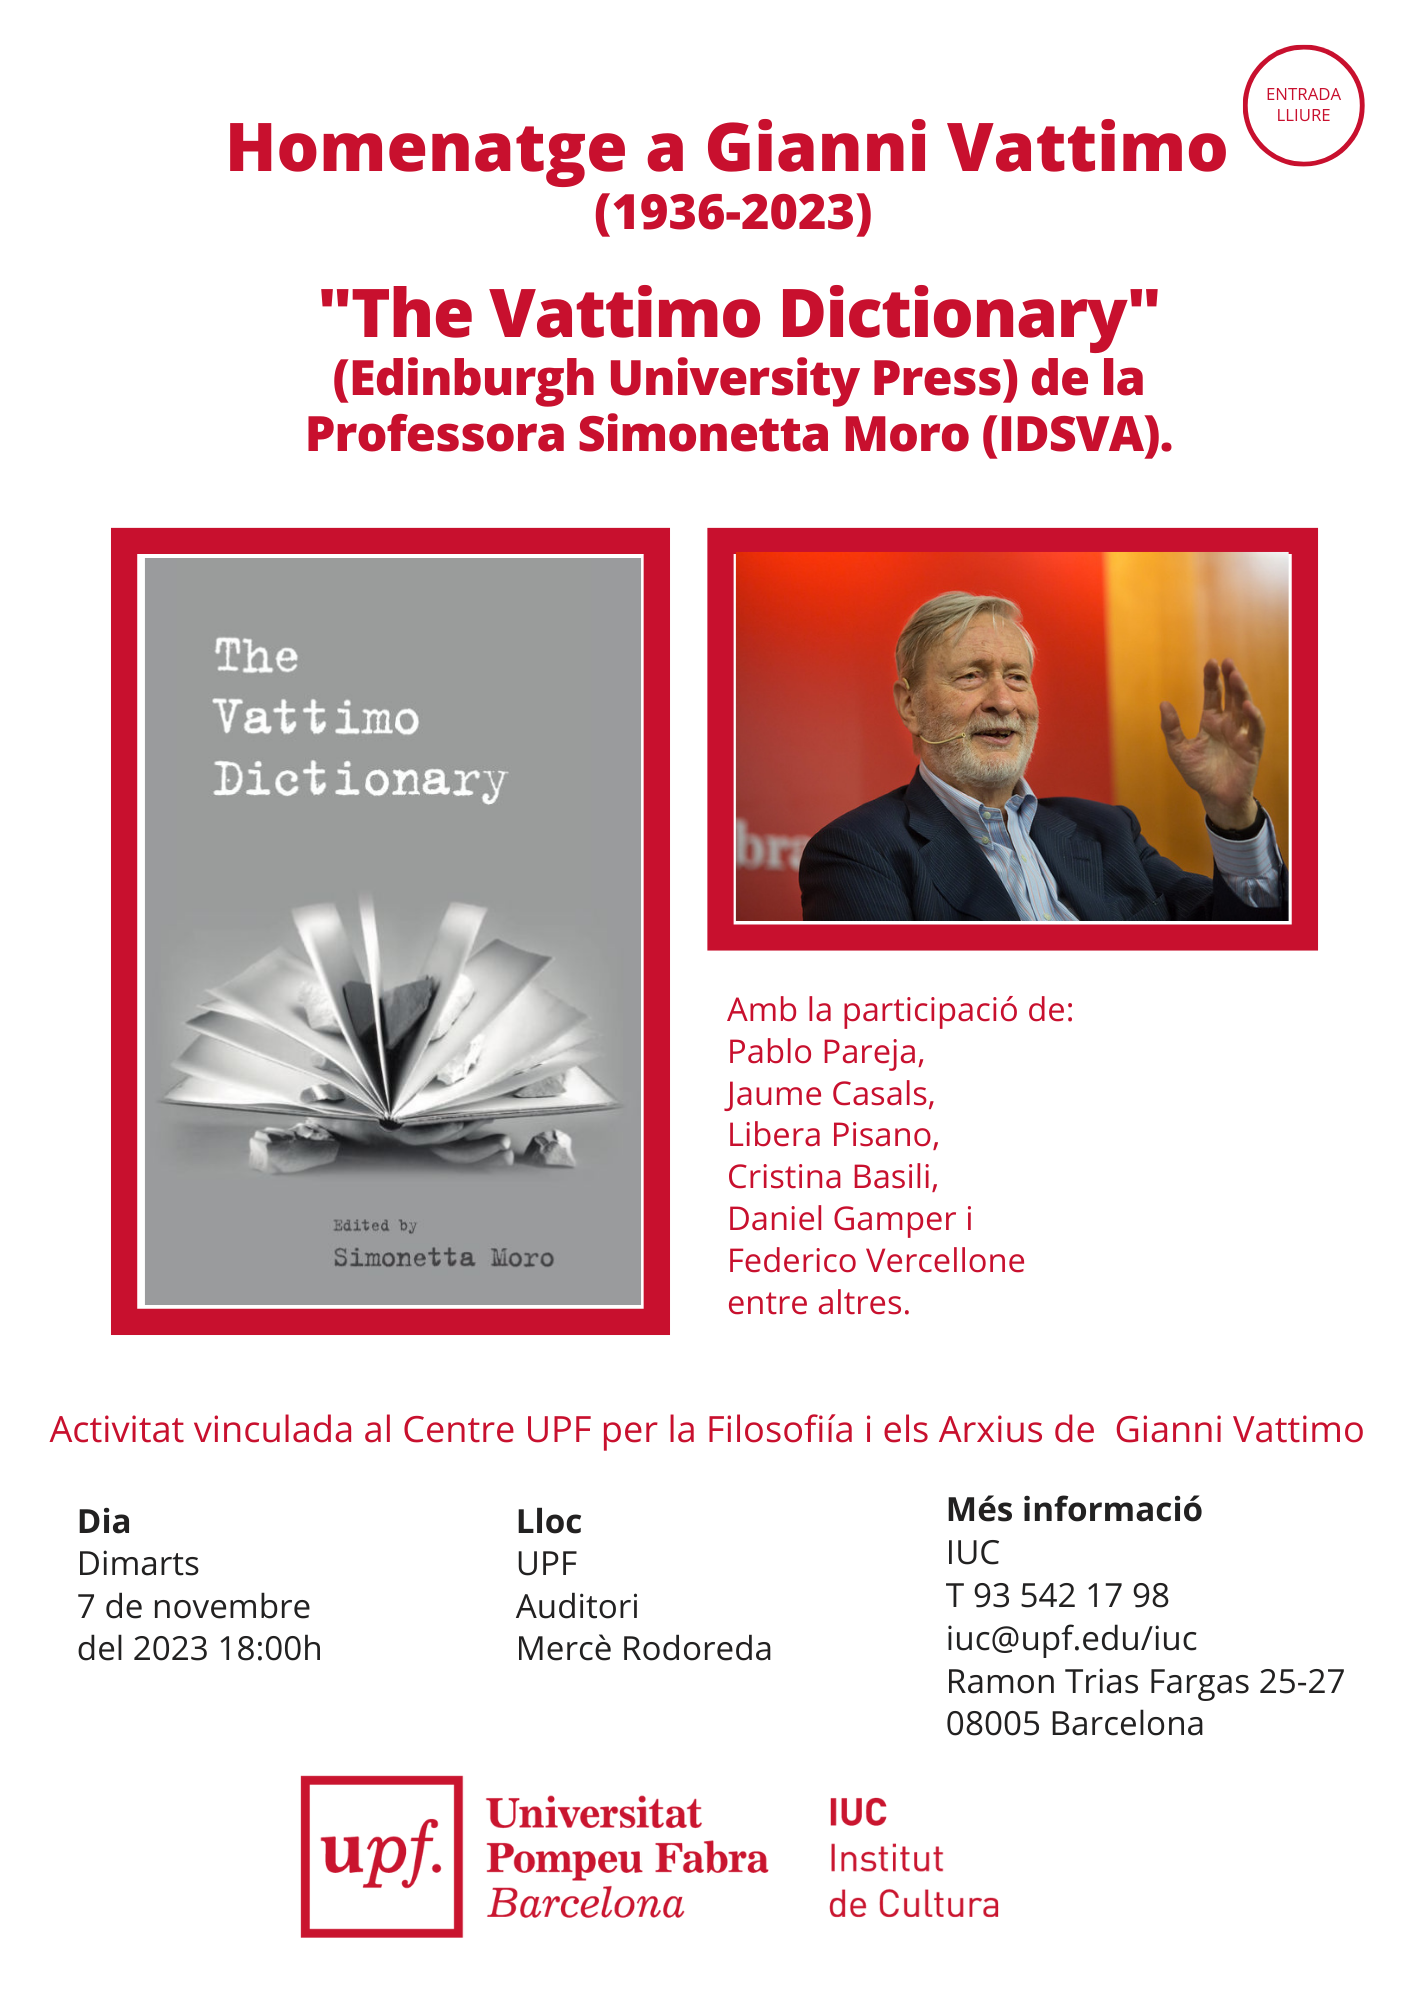 November 7. Tribute to Gianni Vattimo and International Book Launch.